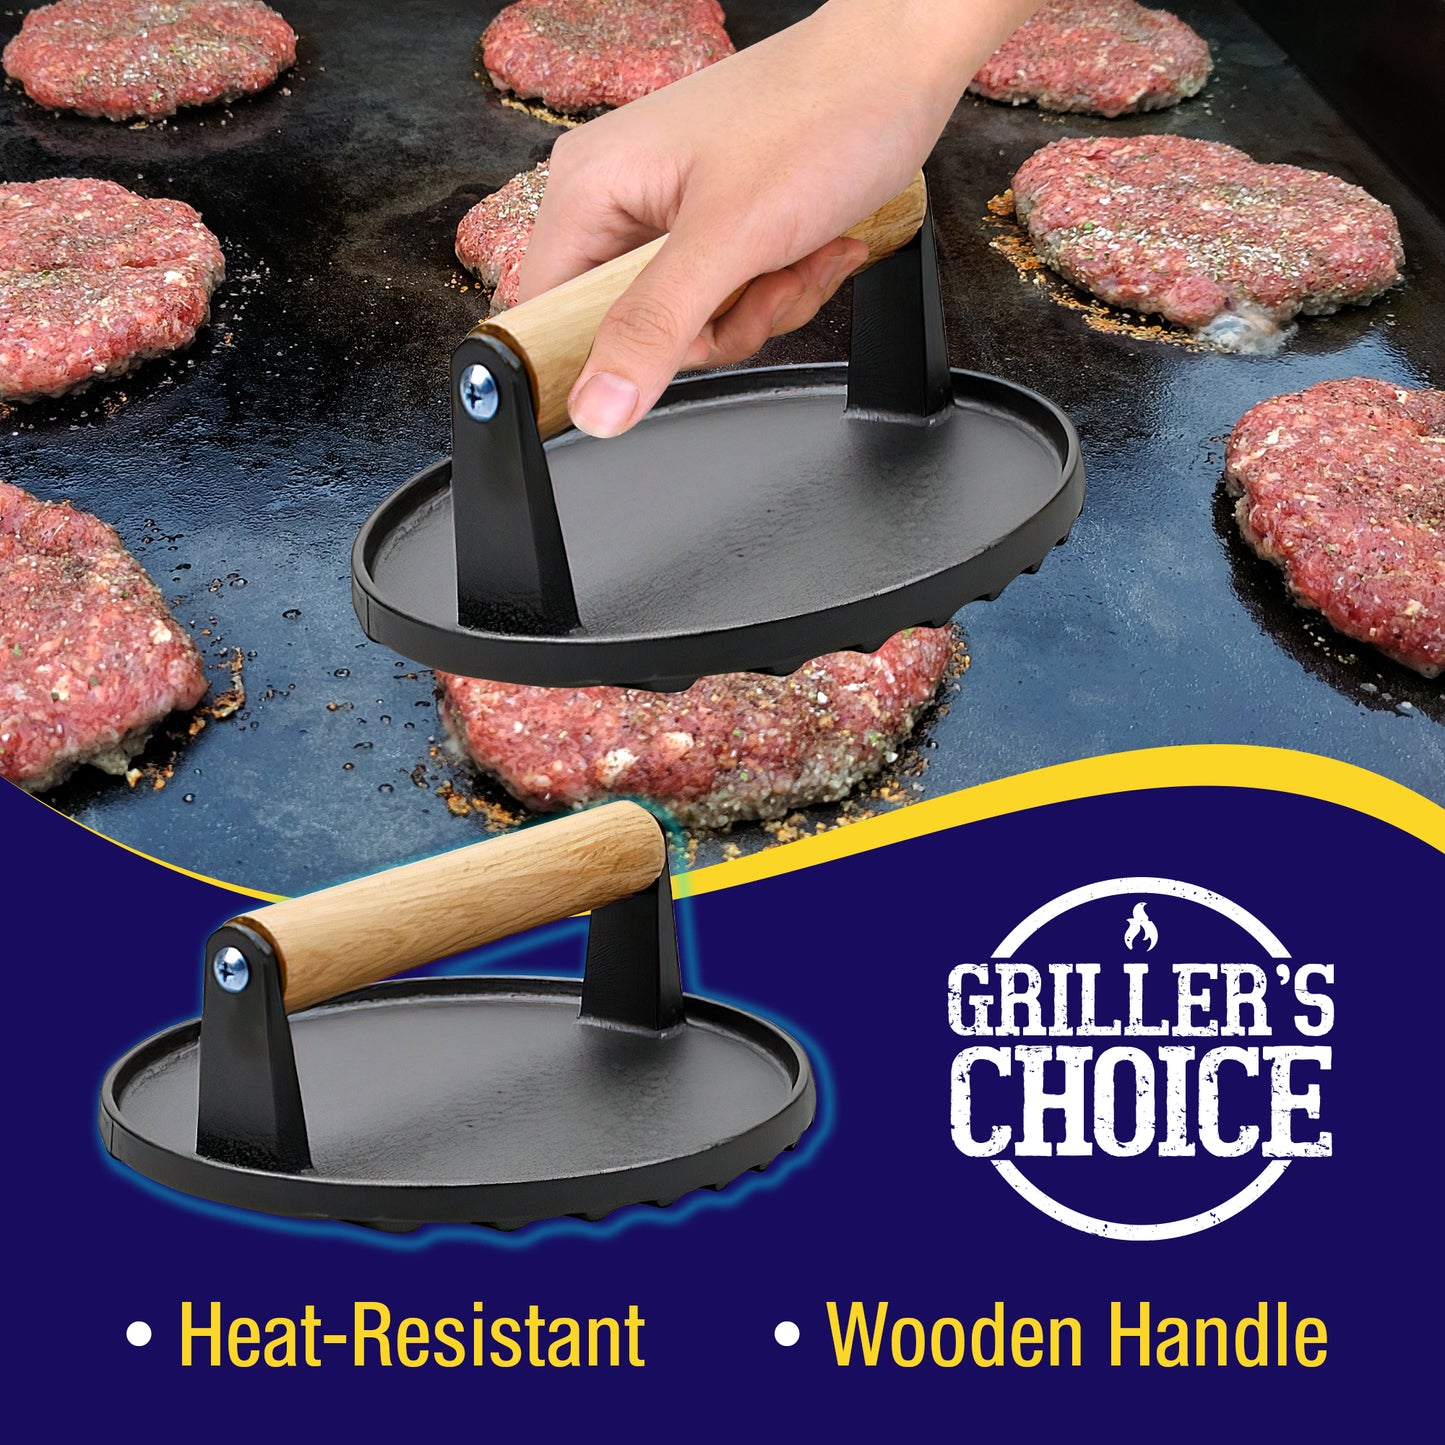 Grillers Choice Bacon Press and Grill Press 2 Piece Set - Durable Cast Iron Meat Press, Hamburger Smasher, Perfect for Grilling and Griddle Cooking, Ideal for Chefs and Cooks